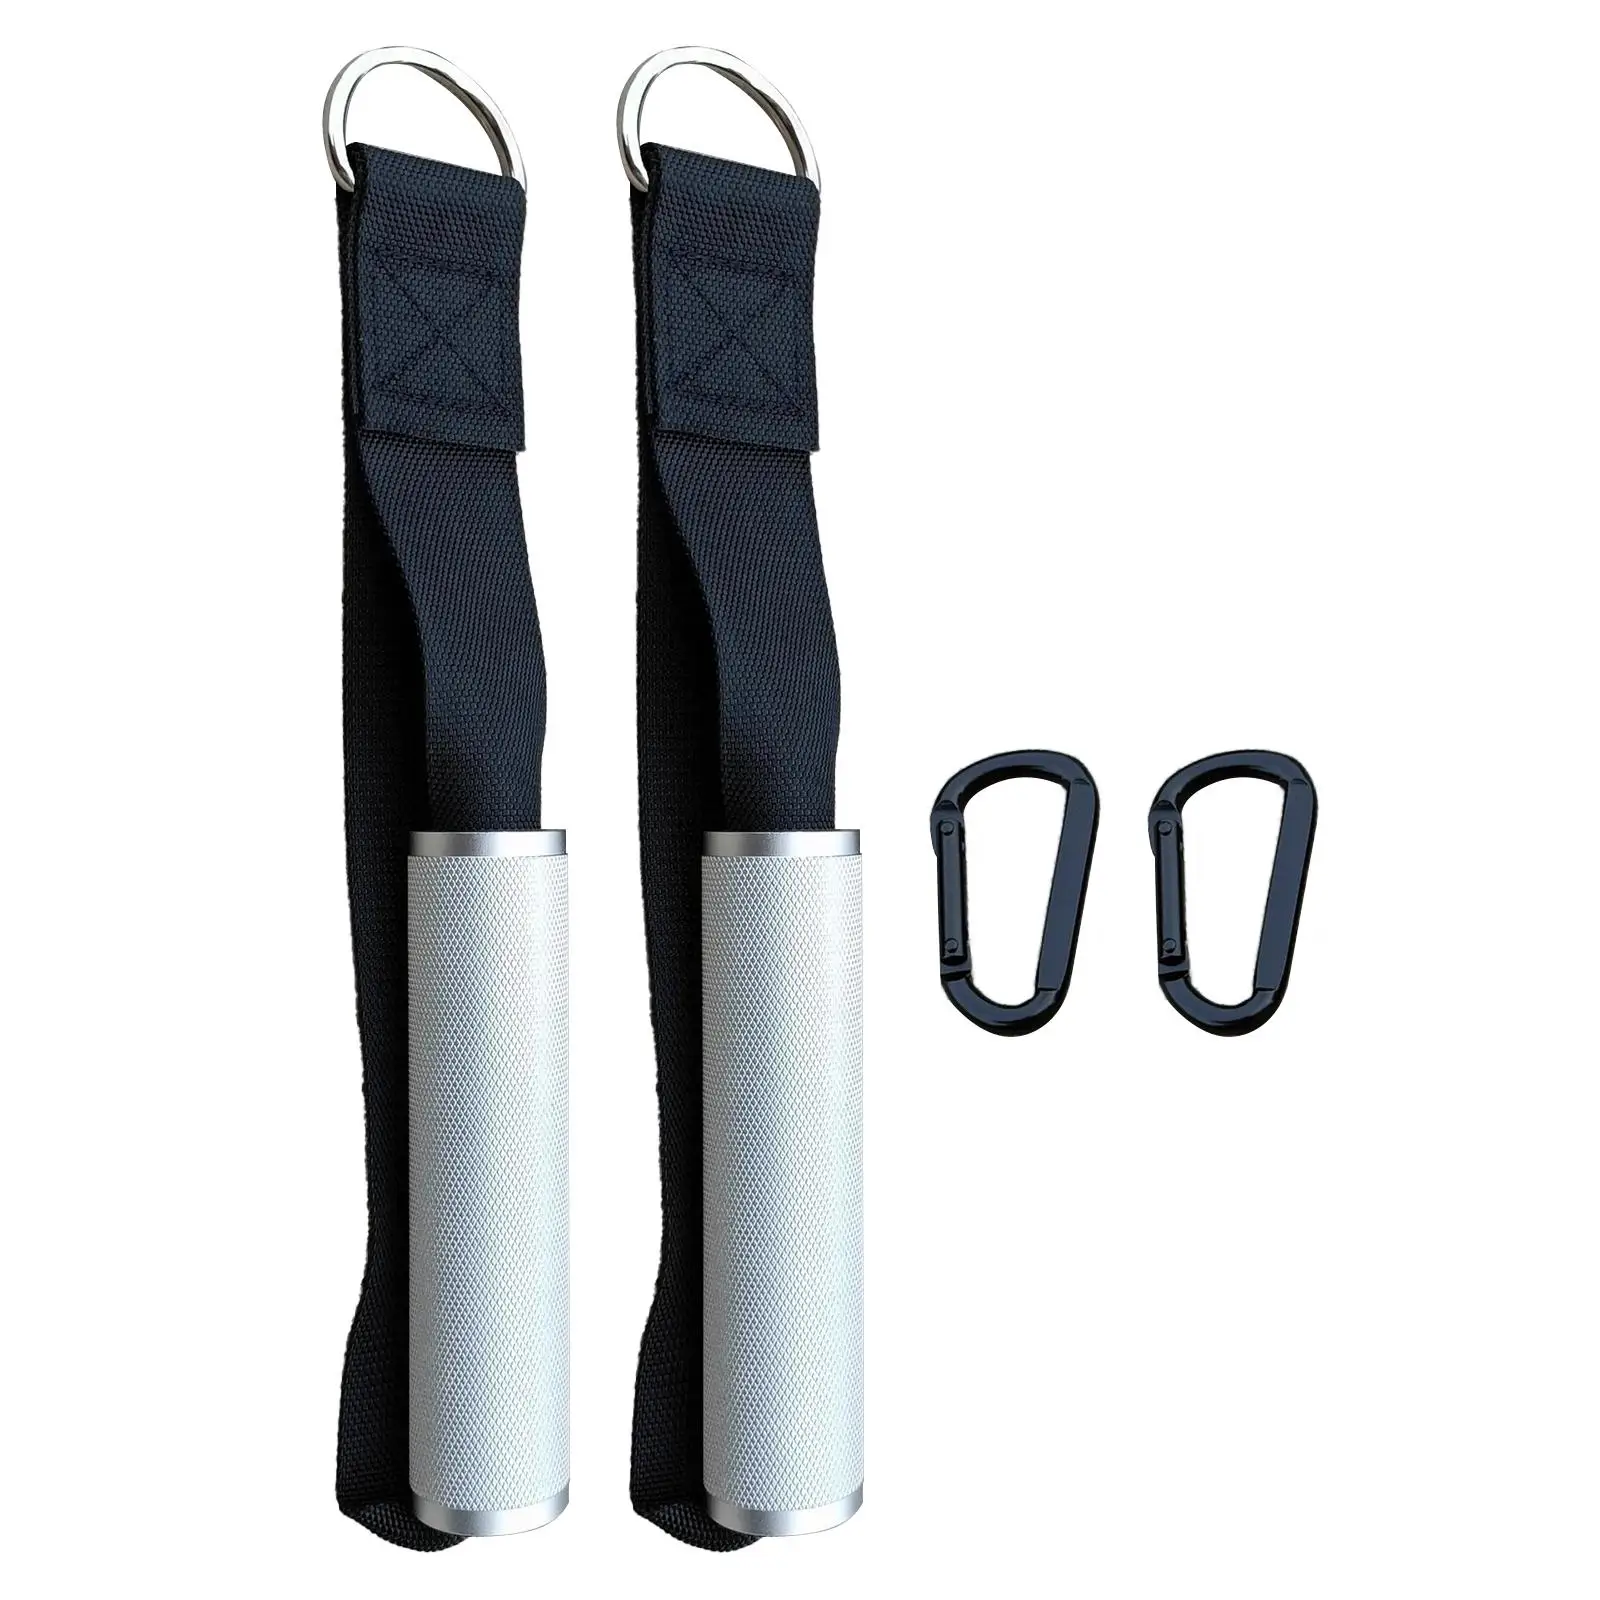 2 Pieces Gym Handles Workout Gymnastics Hanging Resistance Exercise Fitment Exercise Equipment for Pilates Strength Trainer Yoga